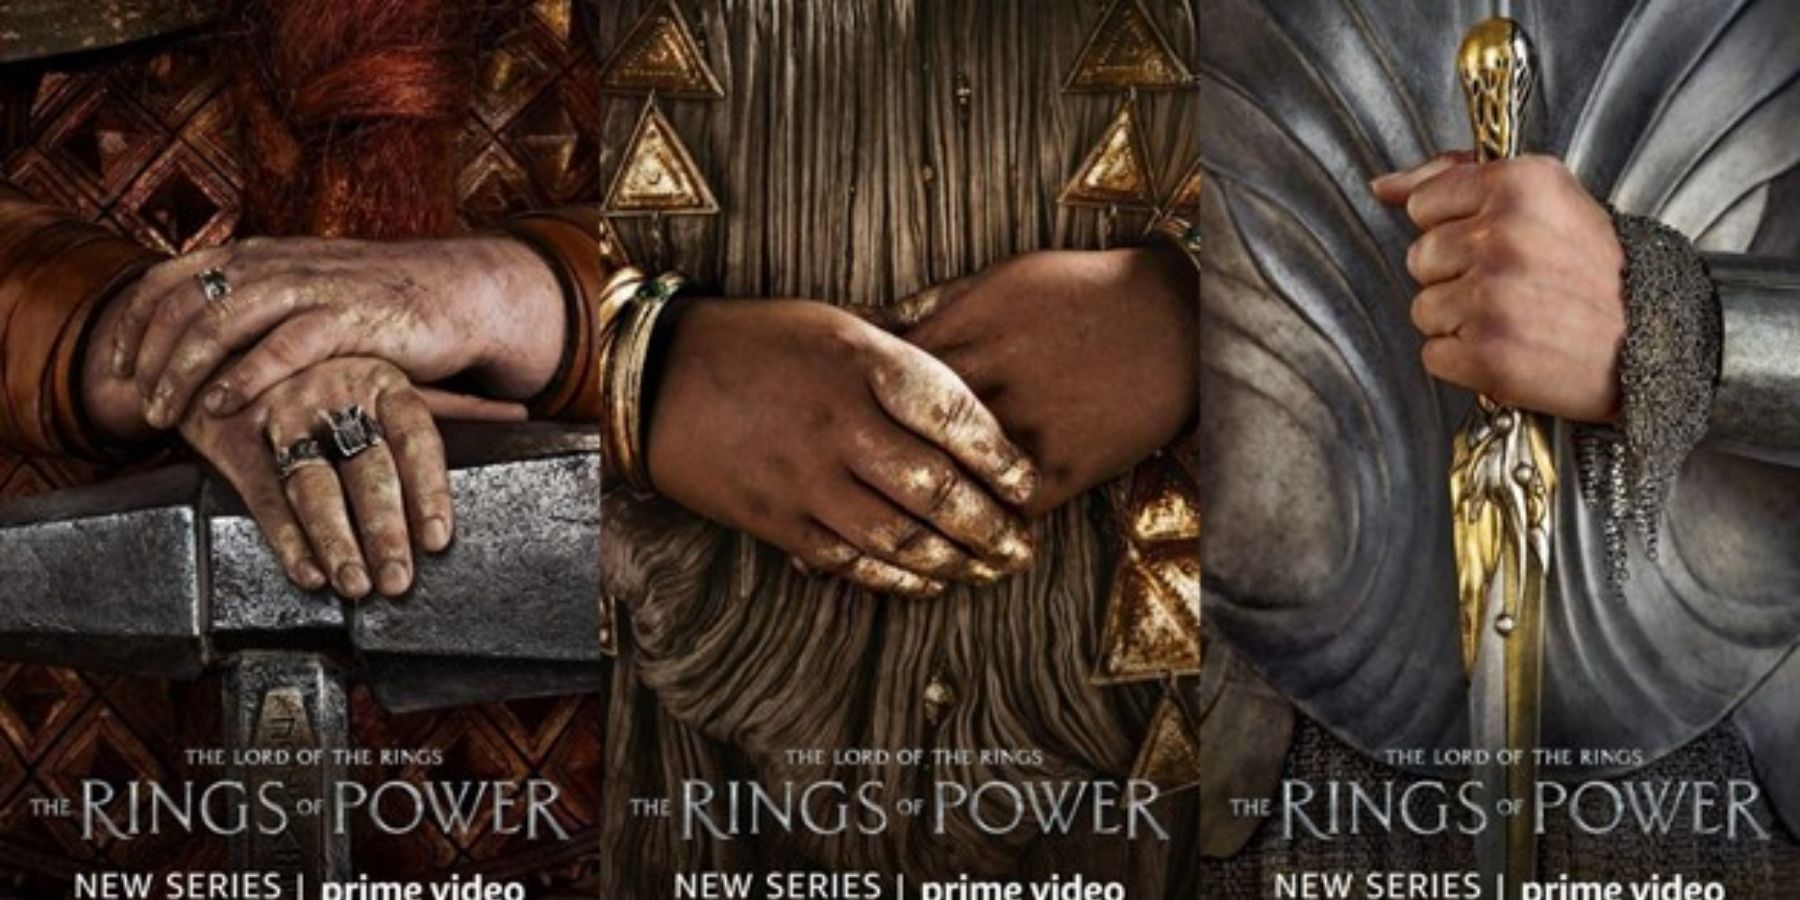 Rings of Power' series reveals another underdiscussed aspect of